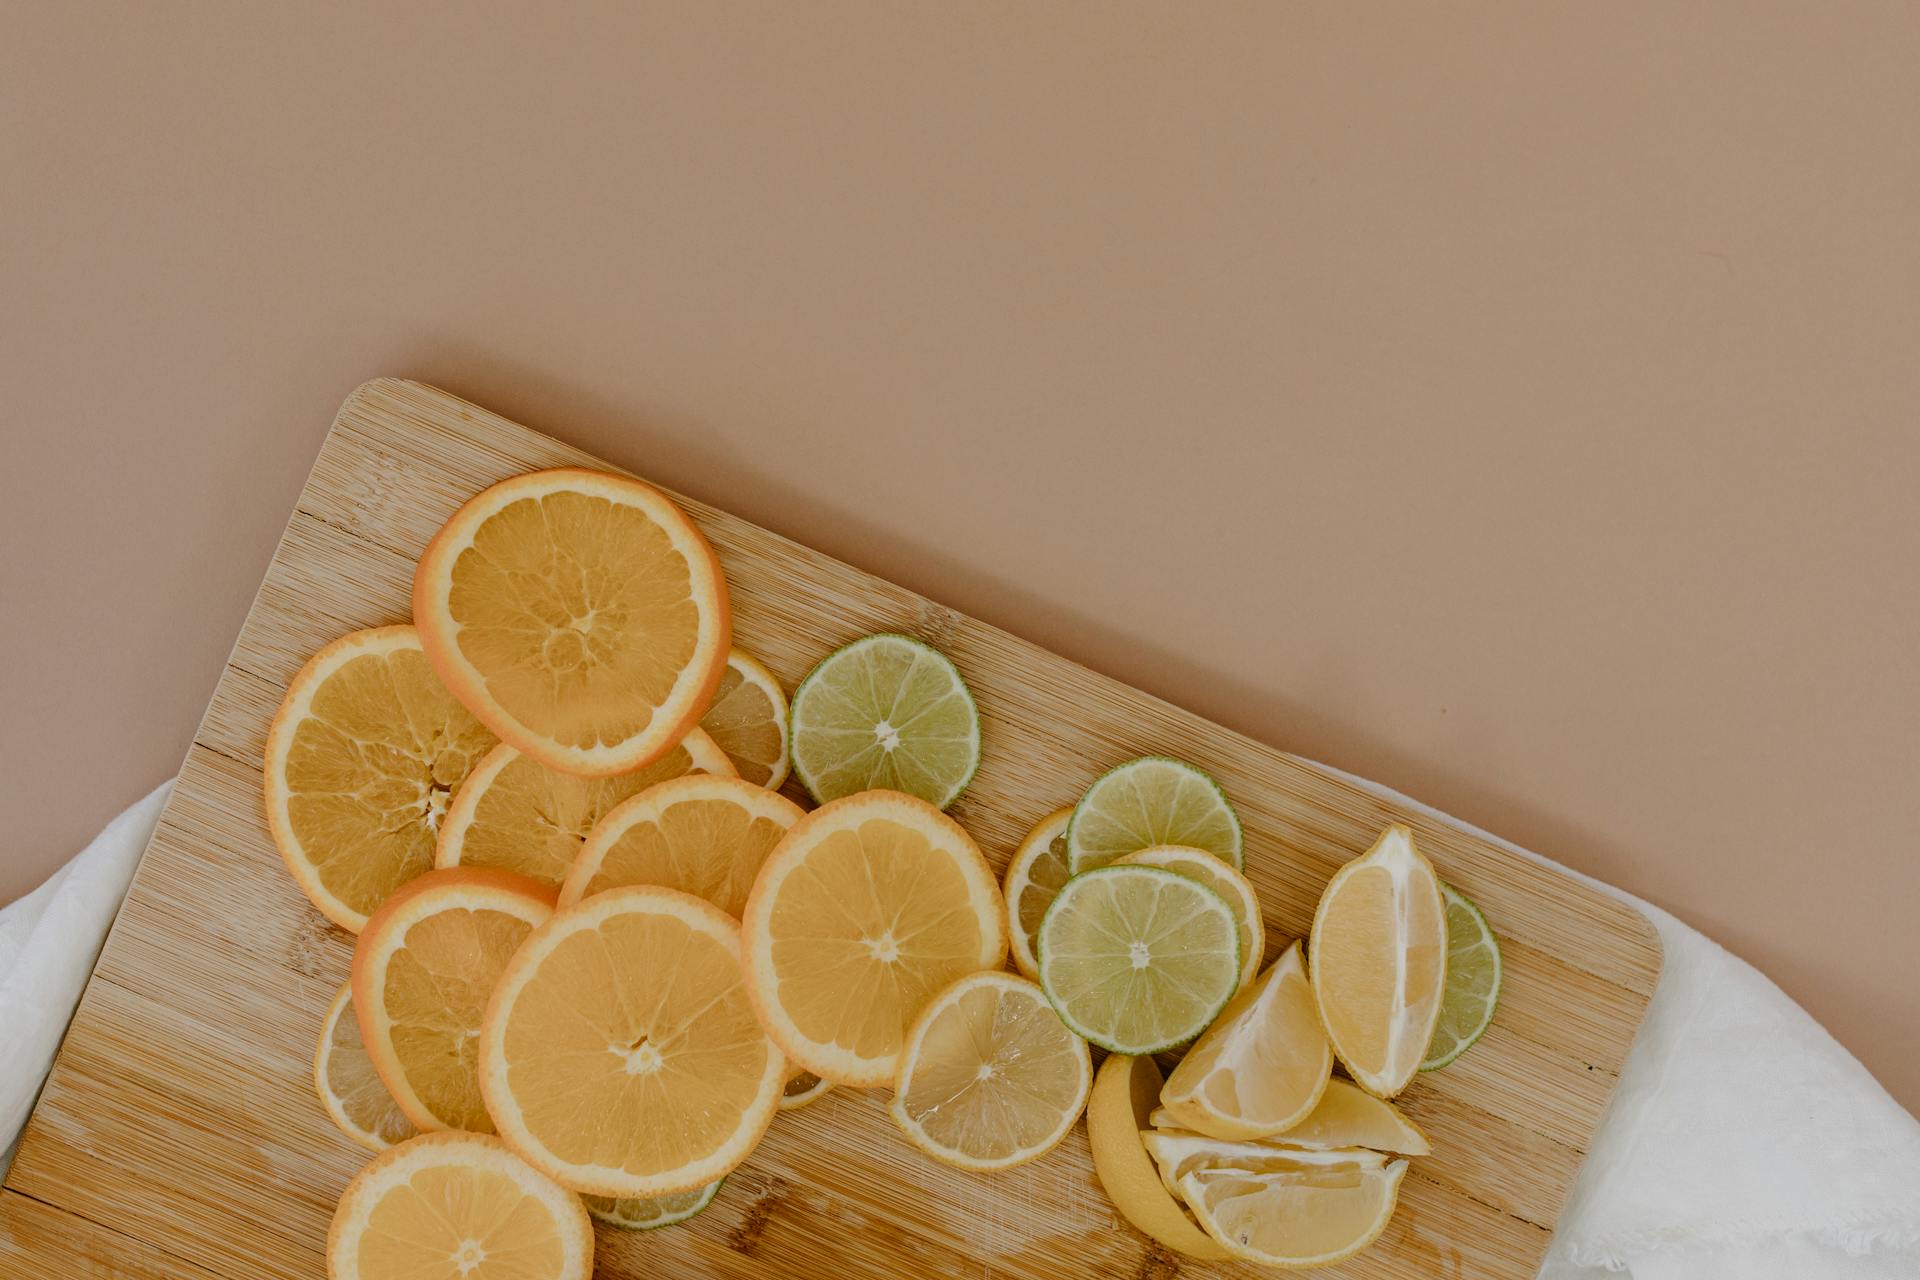 Top view of sliced with yellow lemons near oranges and green limes on wooden cutting board on white napkin on beige surface in light place